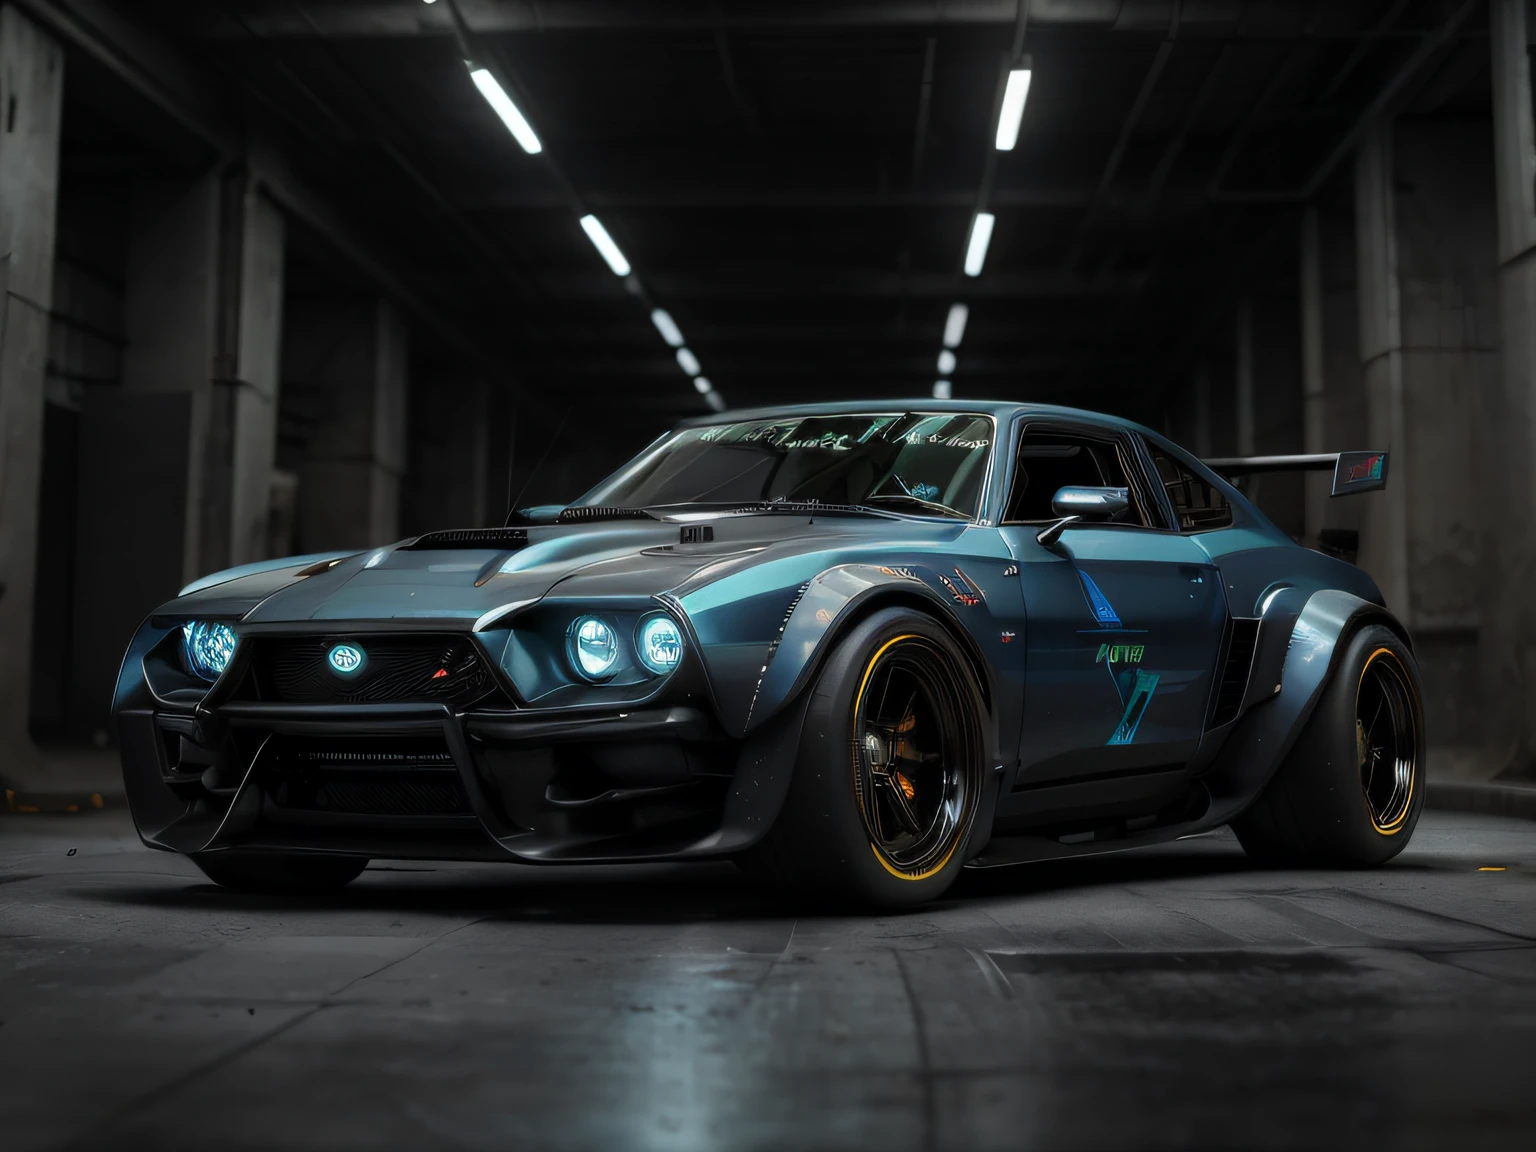 Close-up of a car in a dark room with the lights on, HQ 4K обои, Daniel Maidman Octane Rendering, Need for speed, Cinematic frontal shot, Cyberpunk Car, 3D octane rendering concept art, Hyperreal rendering, Wide body, Avant-garde 4K обои, mustang, Рендеринг 4 k, 4k render, 4 thousand. concept-artov, 4k concept art